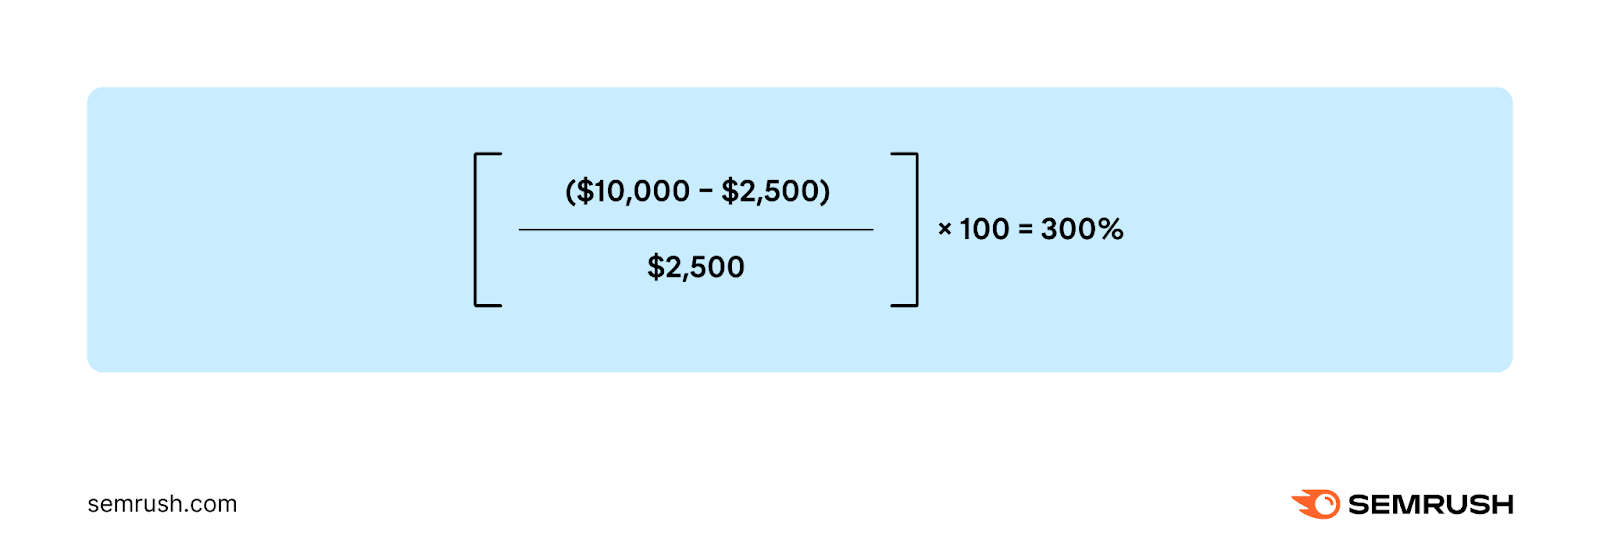 content marketing roi formula example applied to equal 300% roi